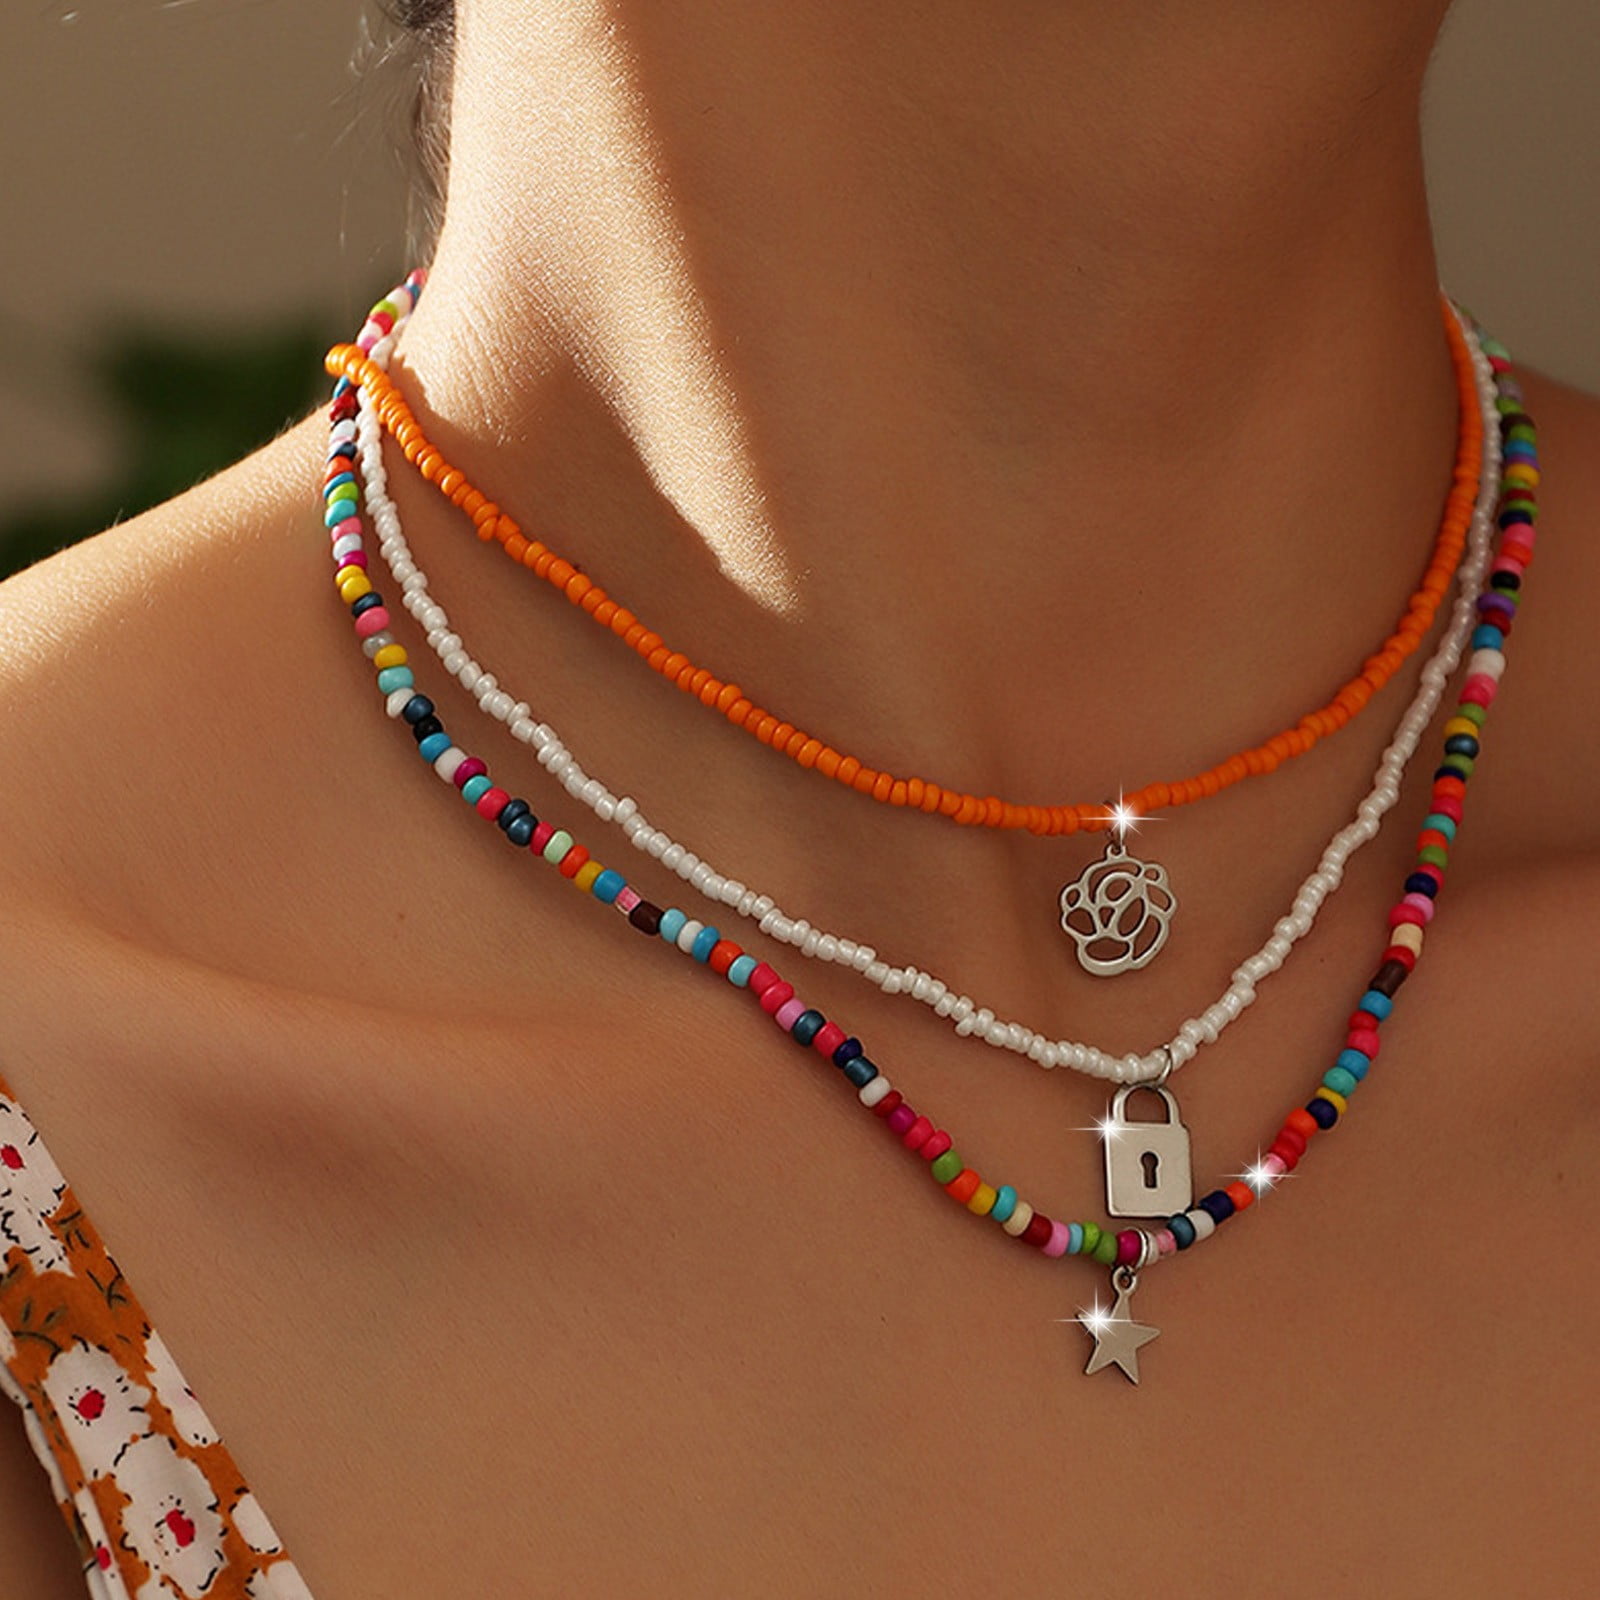 Buy Multicolor Beaded Choker. Mixed Pearl Bead Necklace. Half Pearl and Mix Color  Beads Necklace. Beach Beachy Jewelry. Layering. Trendy Summer Online in  India - Etsy